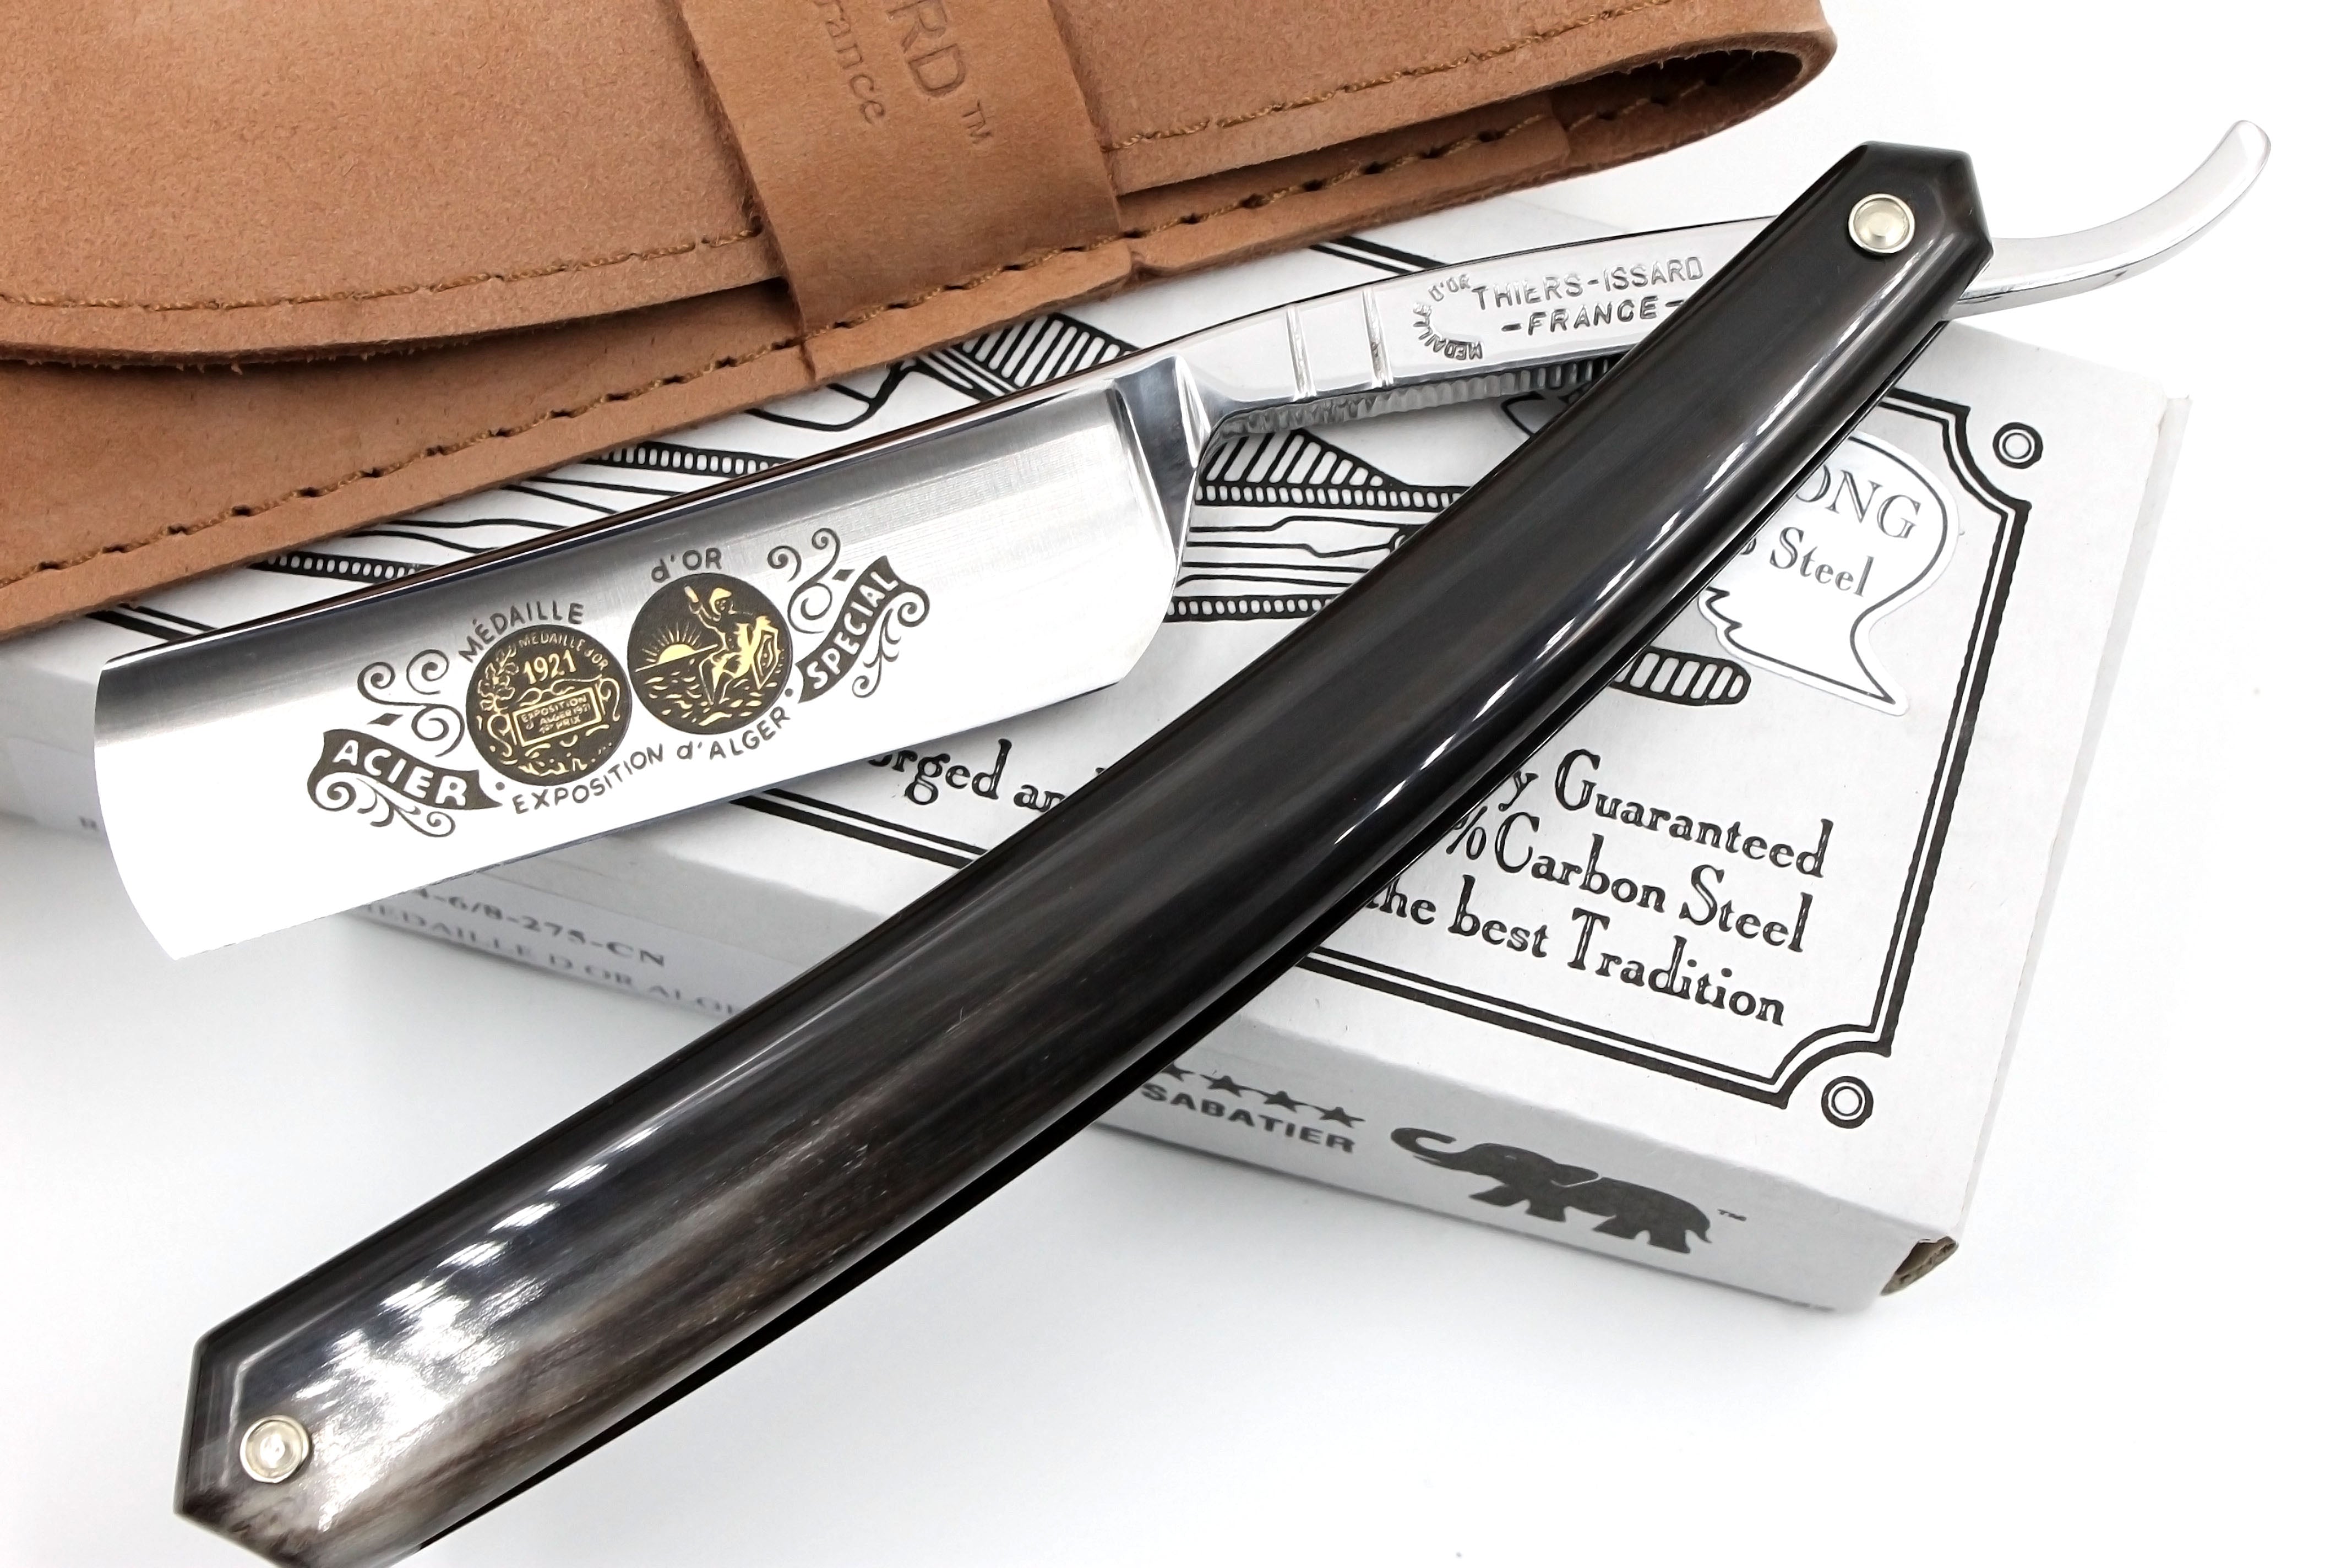 Thiers Issard 6/8 "Medaille d'or Alger" Etch - Black Horn Scales - Full Hollow Straight Razor